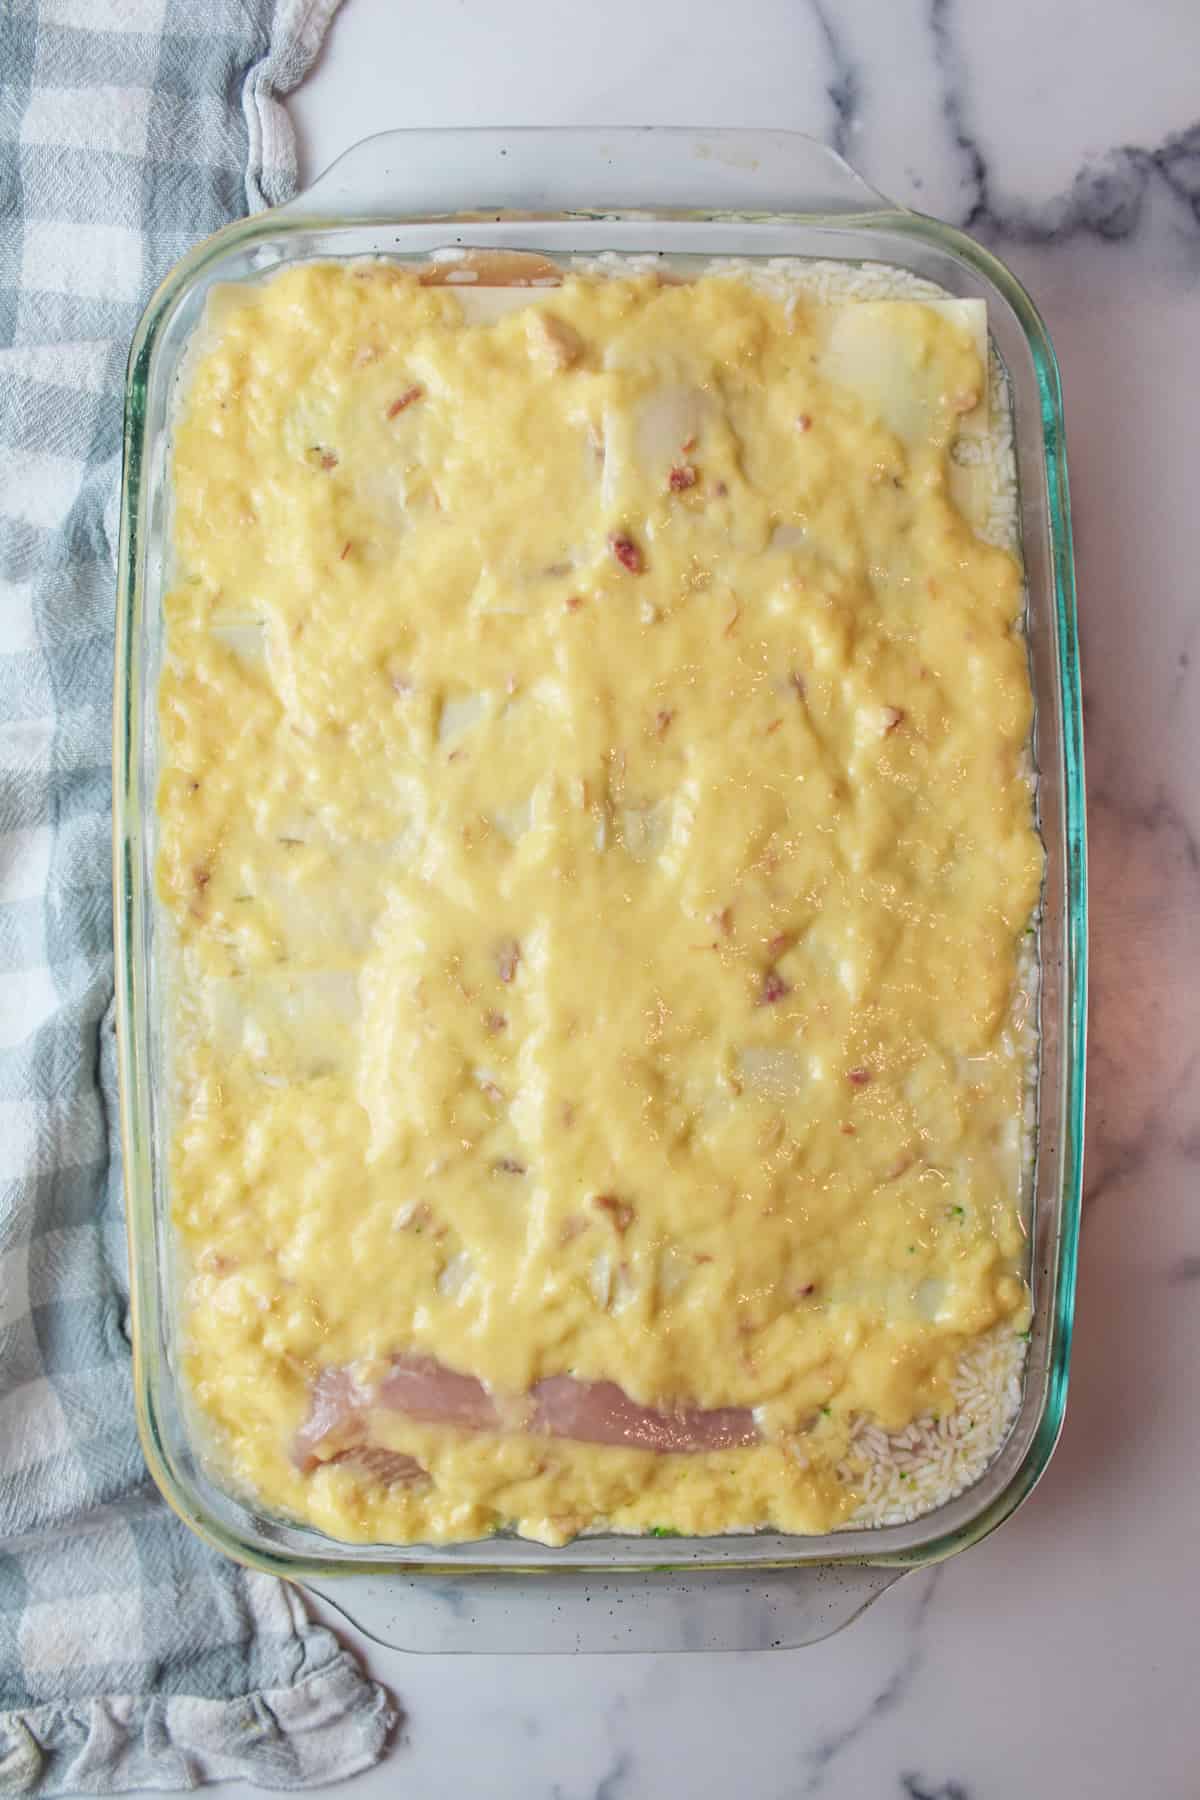 condensed soup spread over swiss cheese slices in baking dish with rice and chicken